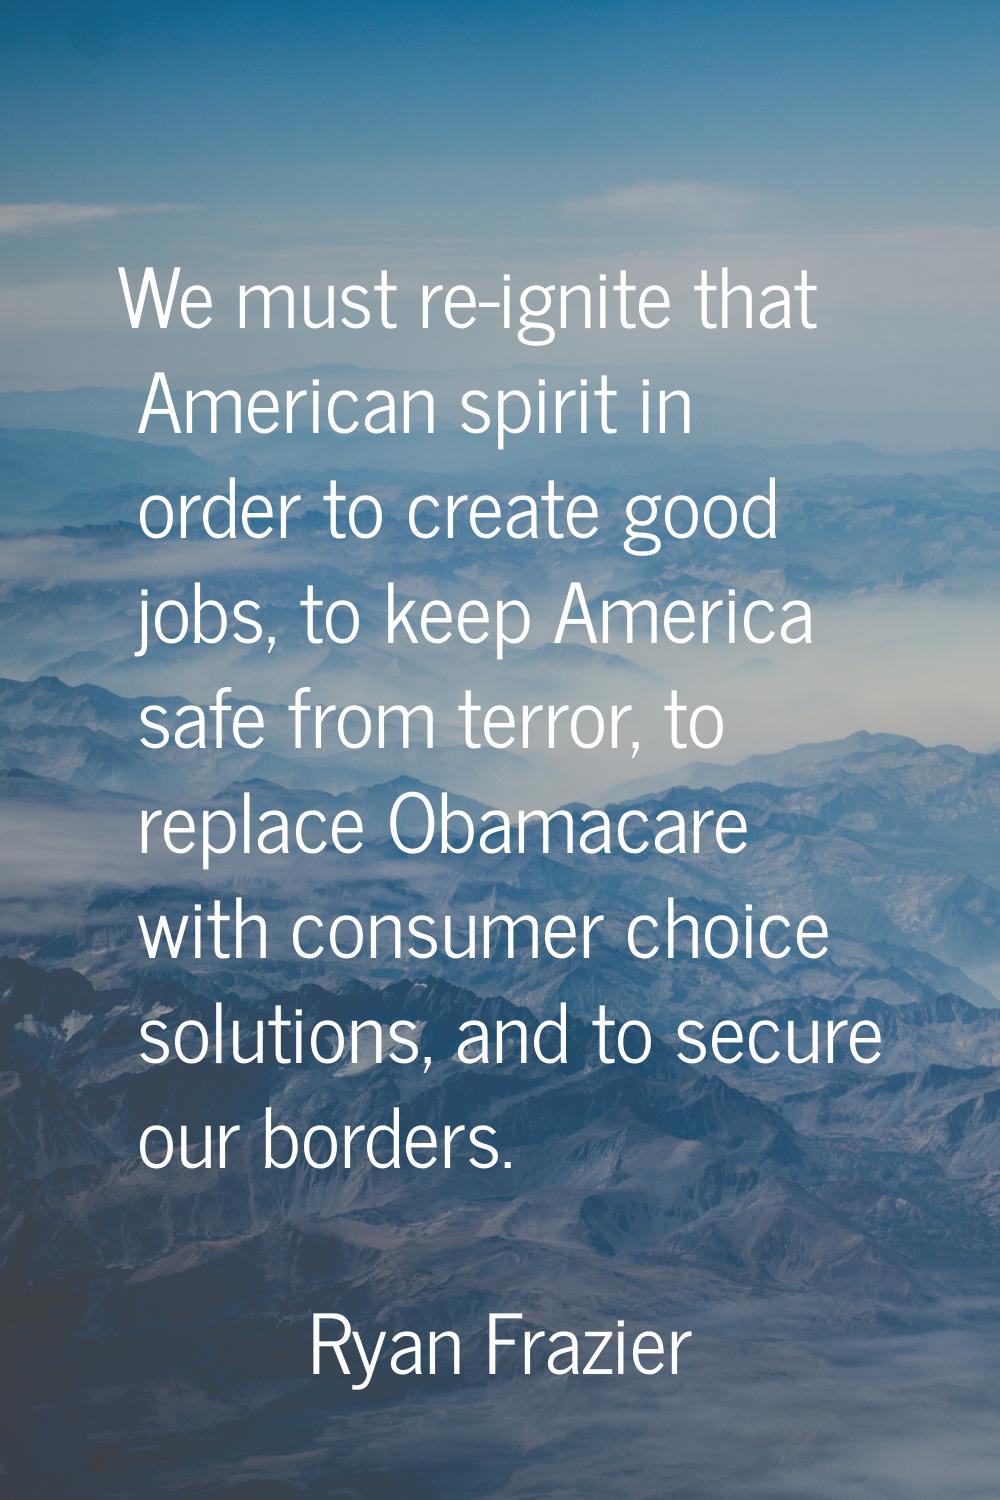 We must re-ignite that American spirit in order to create good jobs, to keep America safe from terr